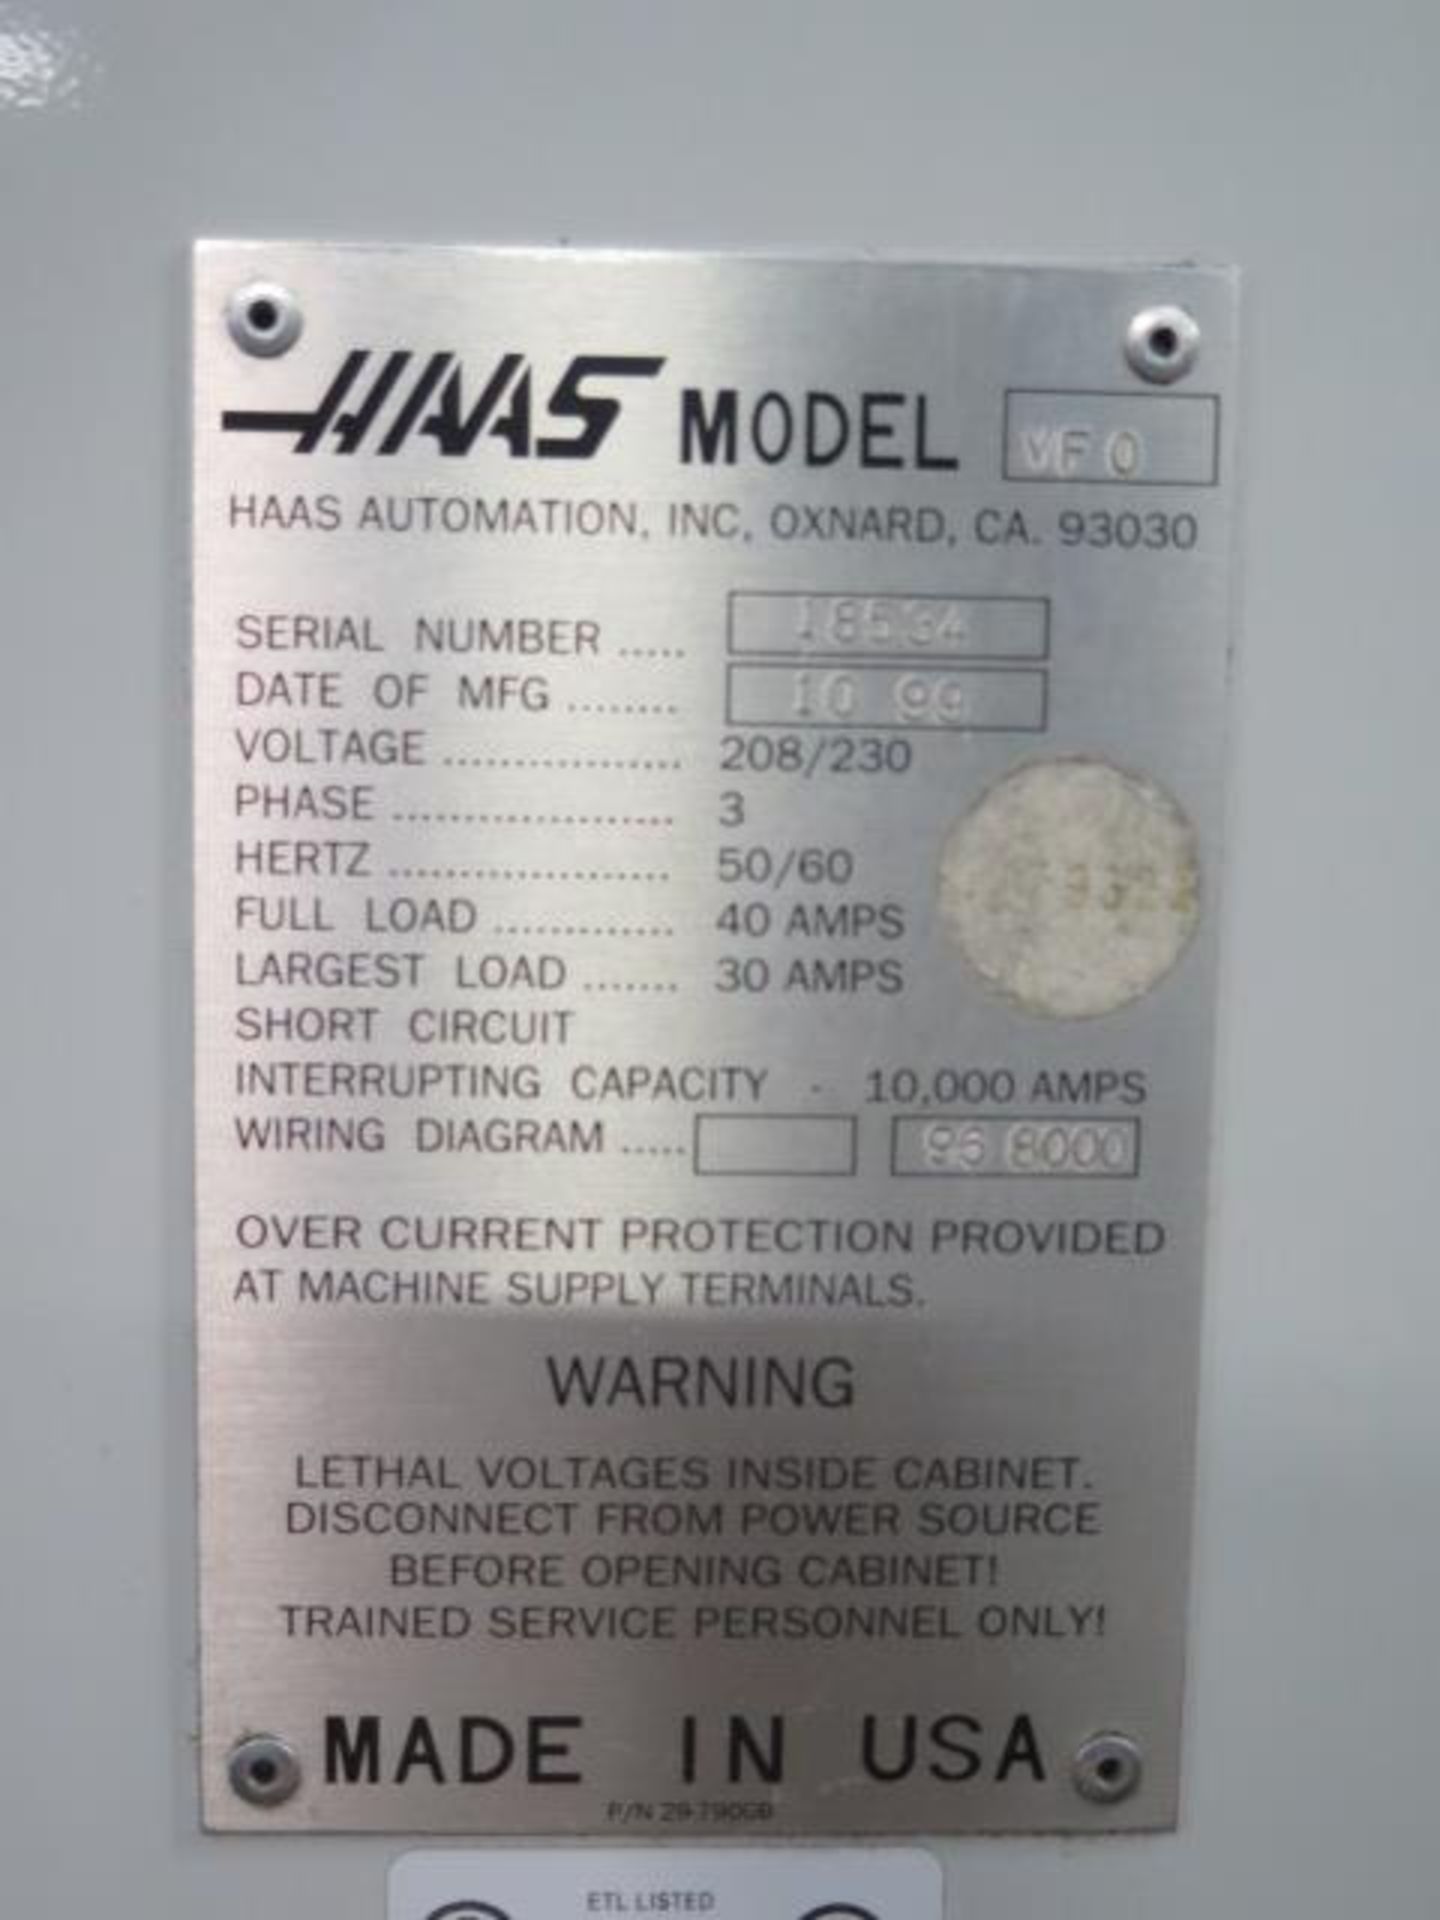 1999 Haas VF-0 CNC Vertical Machining Center s/n 18534 w/ Haas Controls, 20-Station ATC, CAT-40 - Image 14 of 14